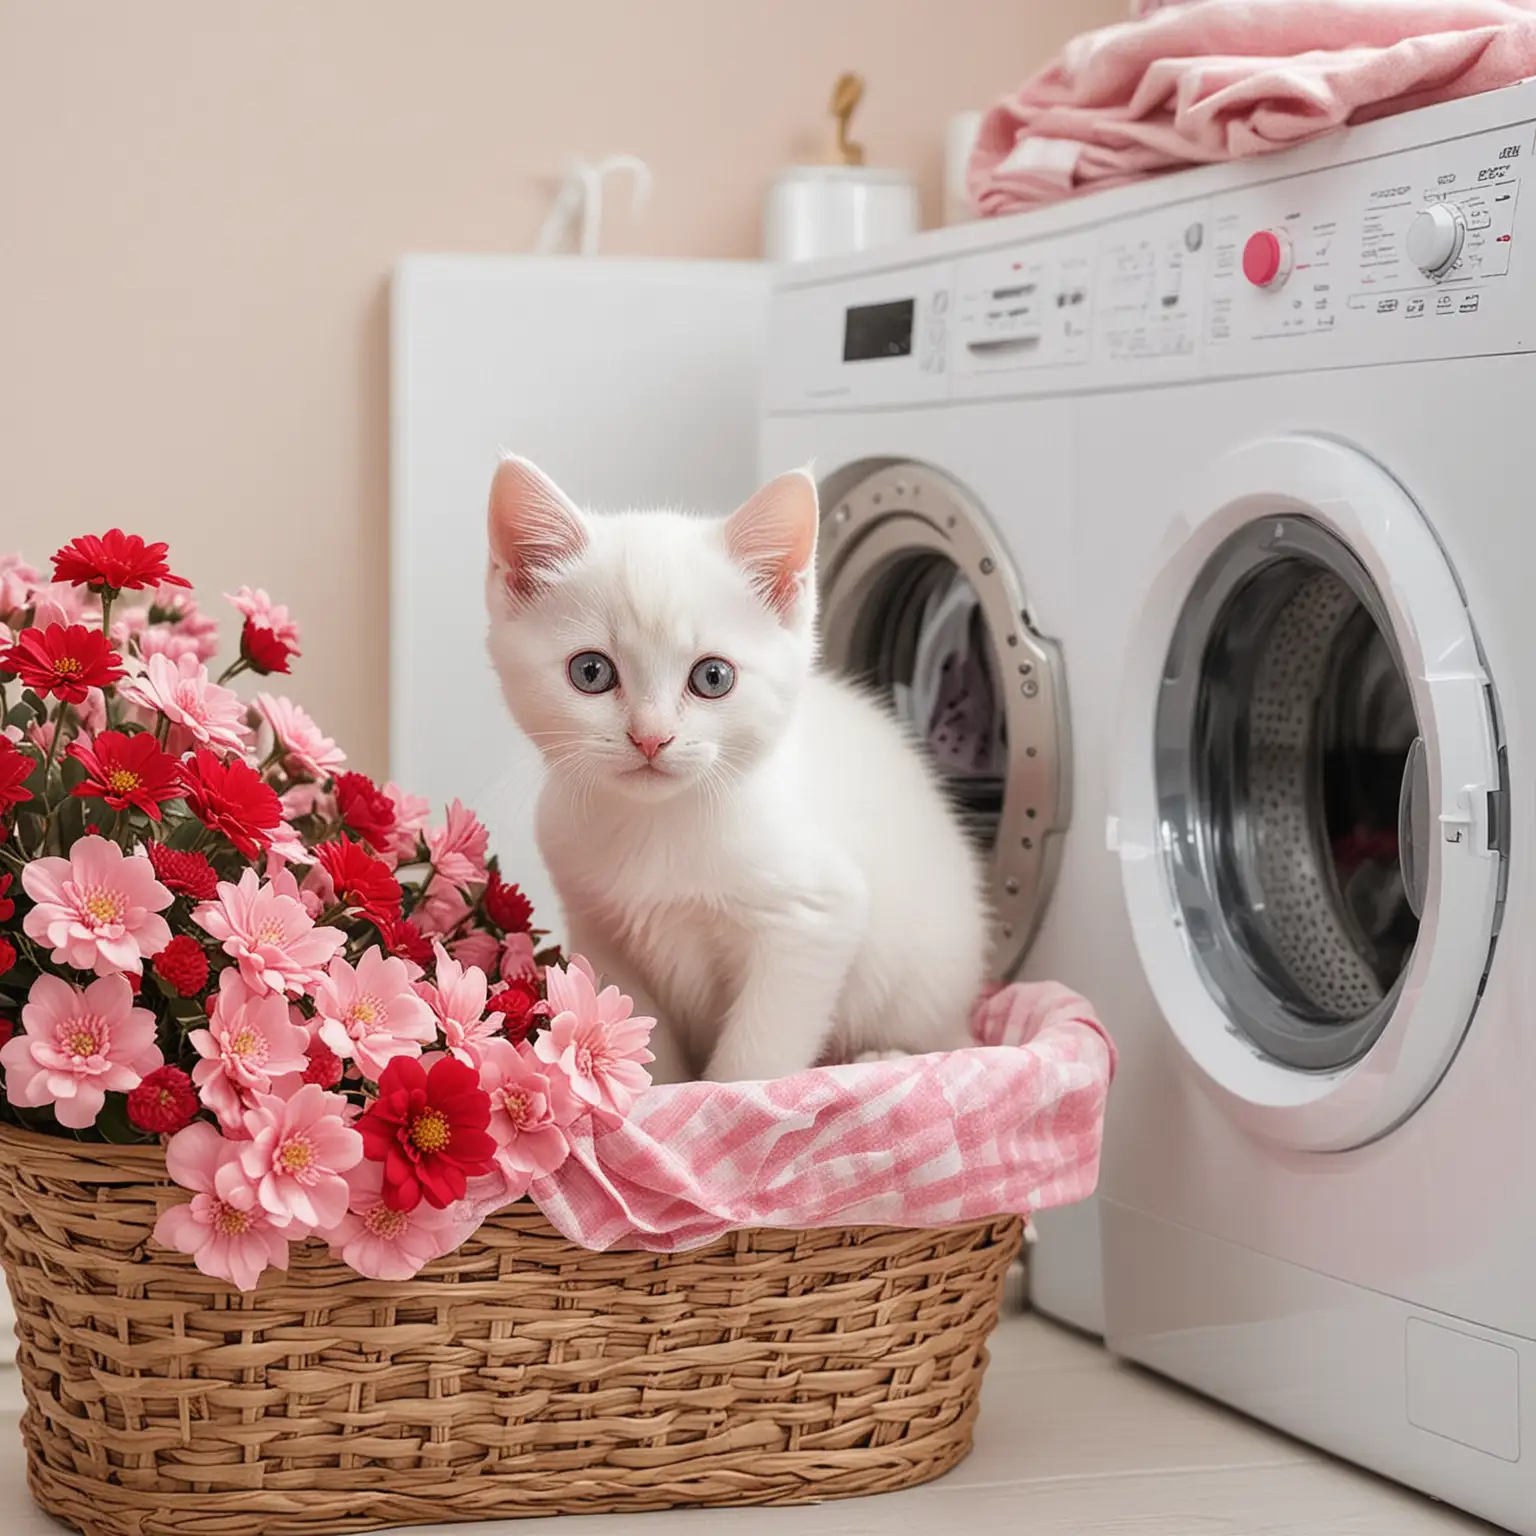 Kitten Playfully Engaging with Laundry Basket Amidst Vibrant Floral Backdrop